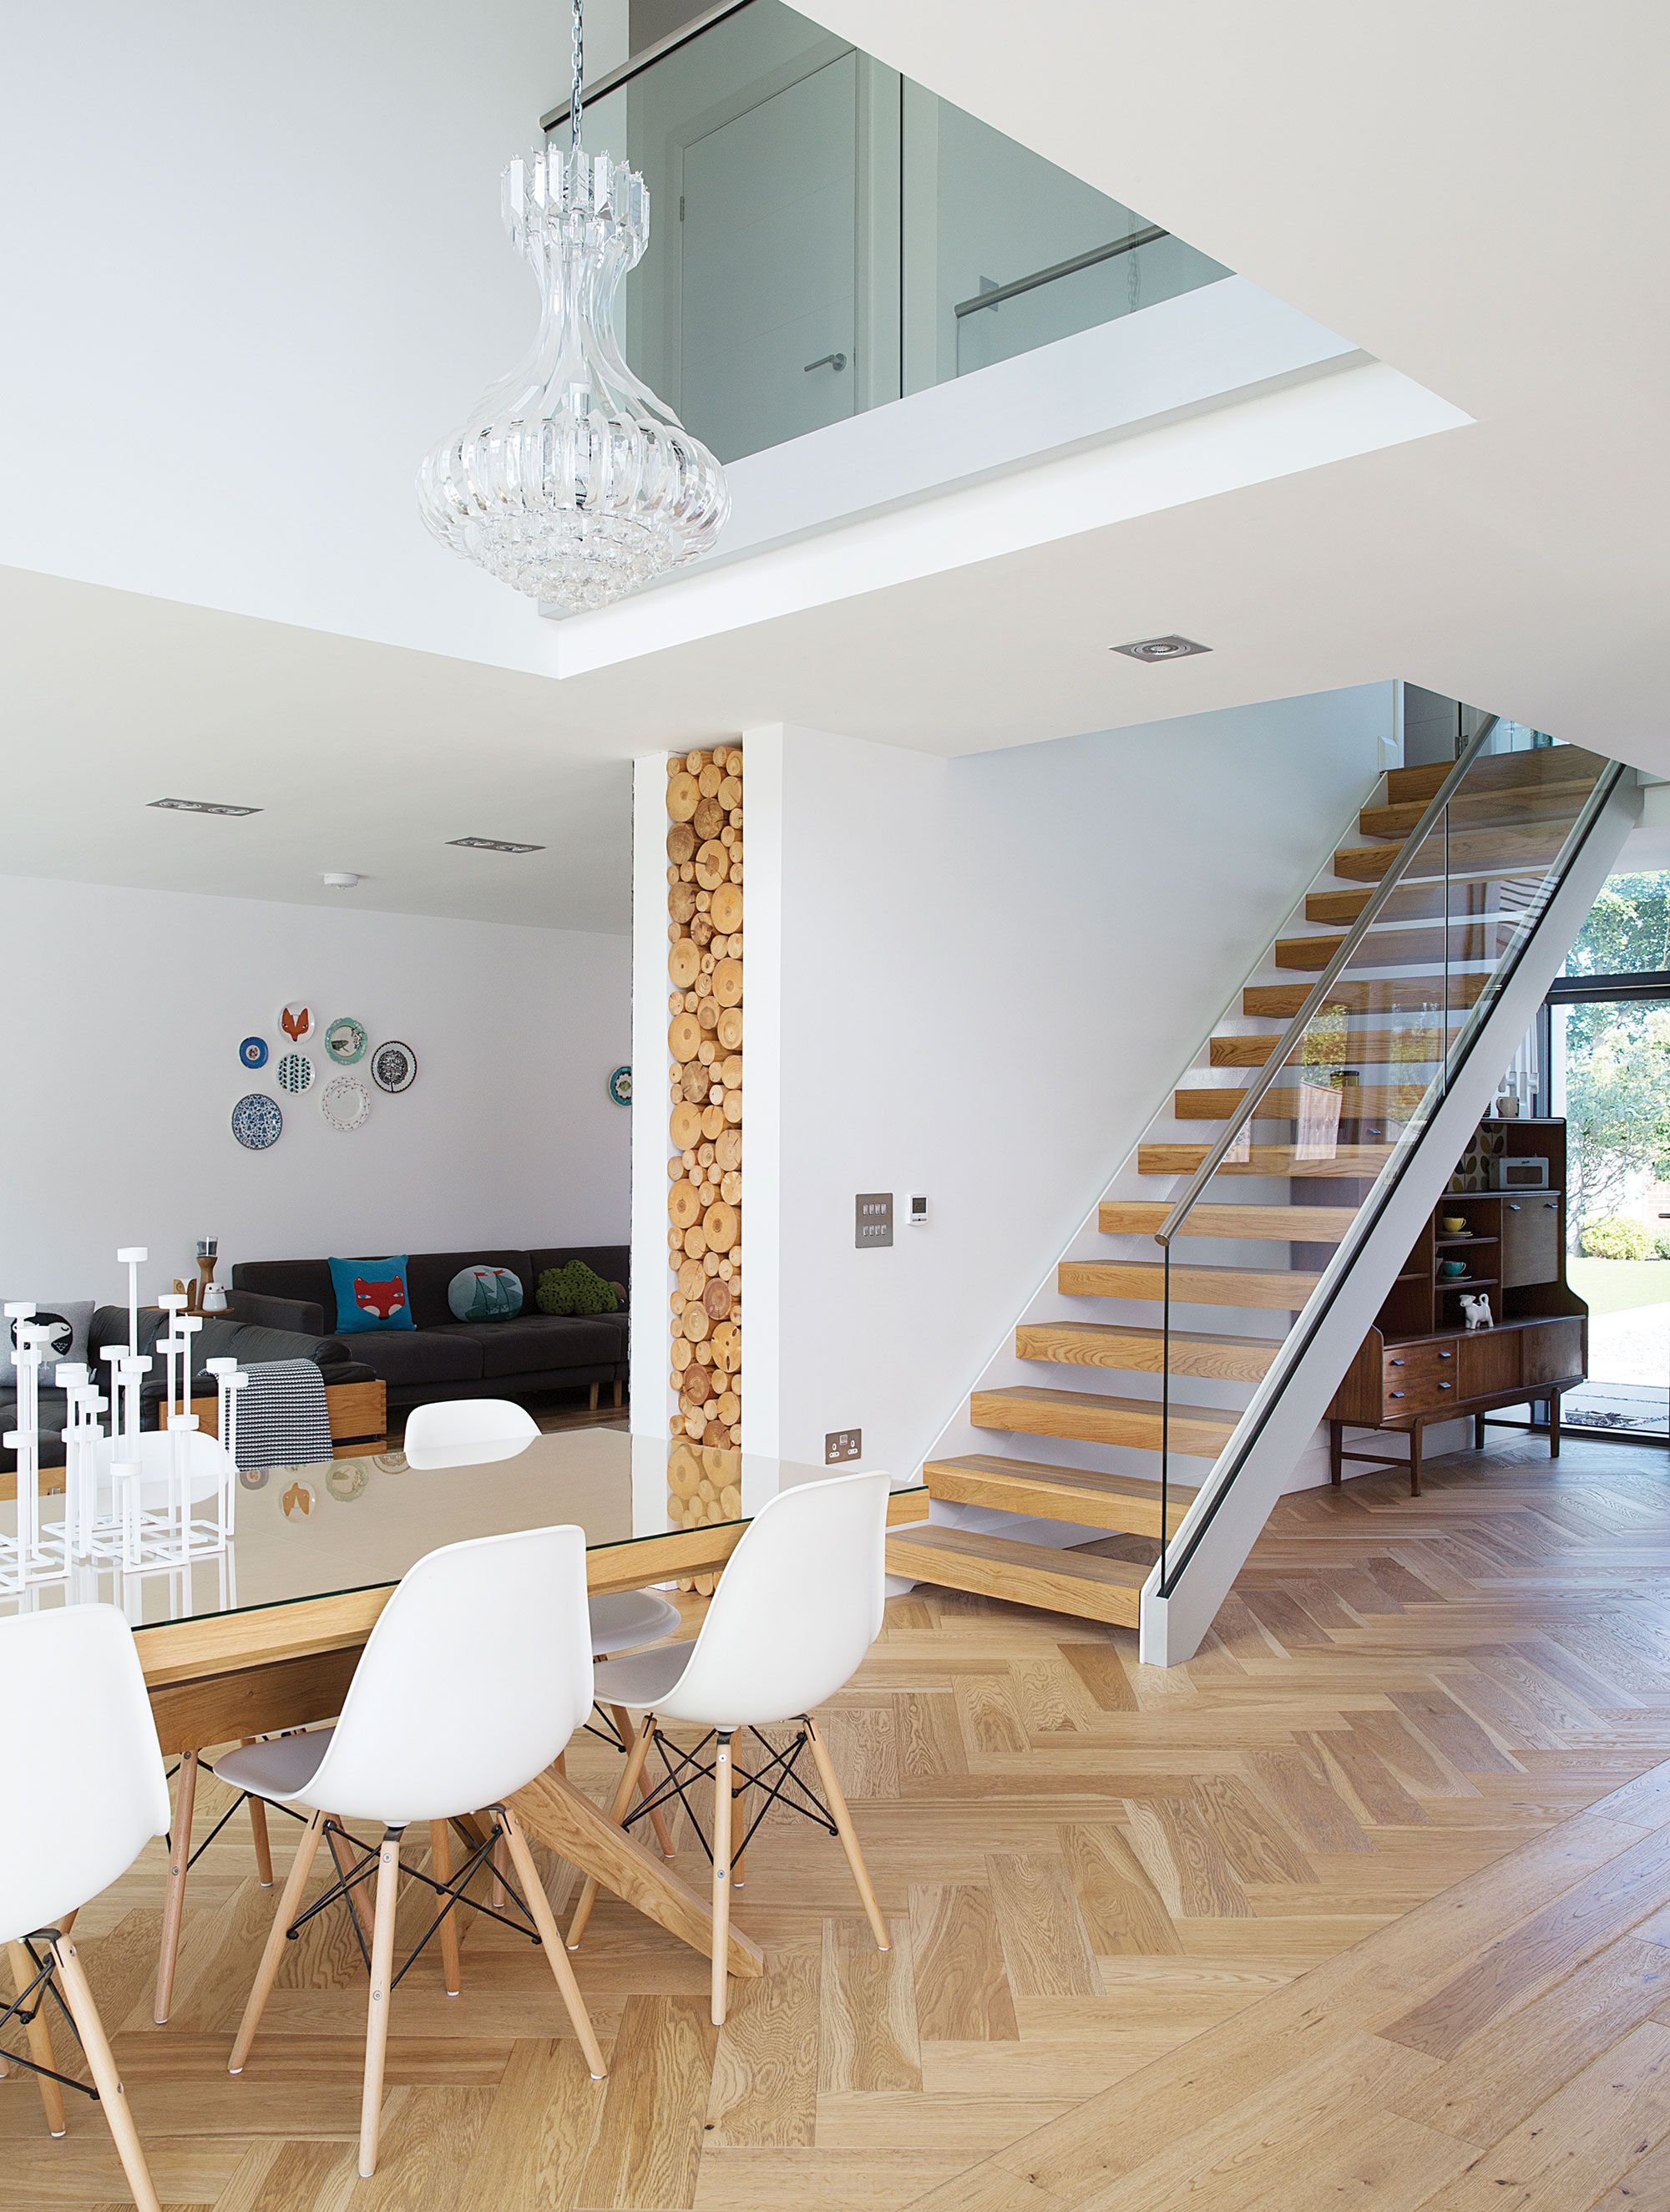 Fire suppression is vital in multi-storey open-plan homes